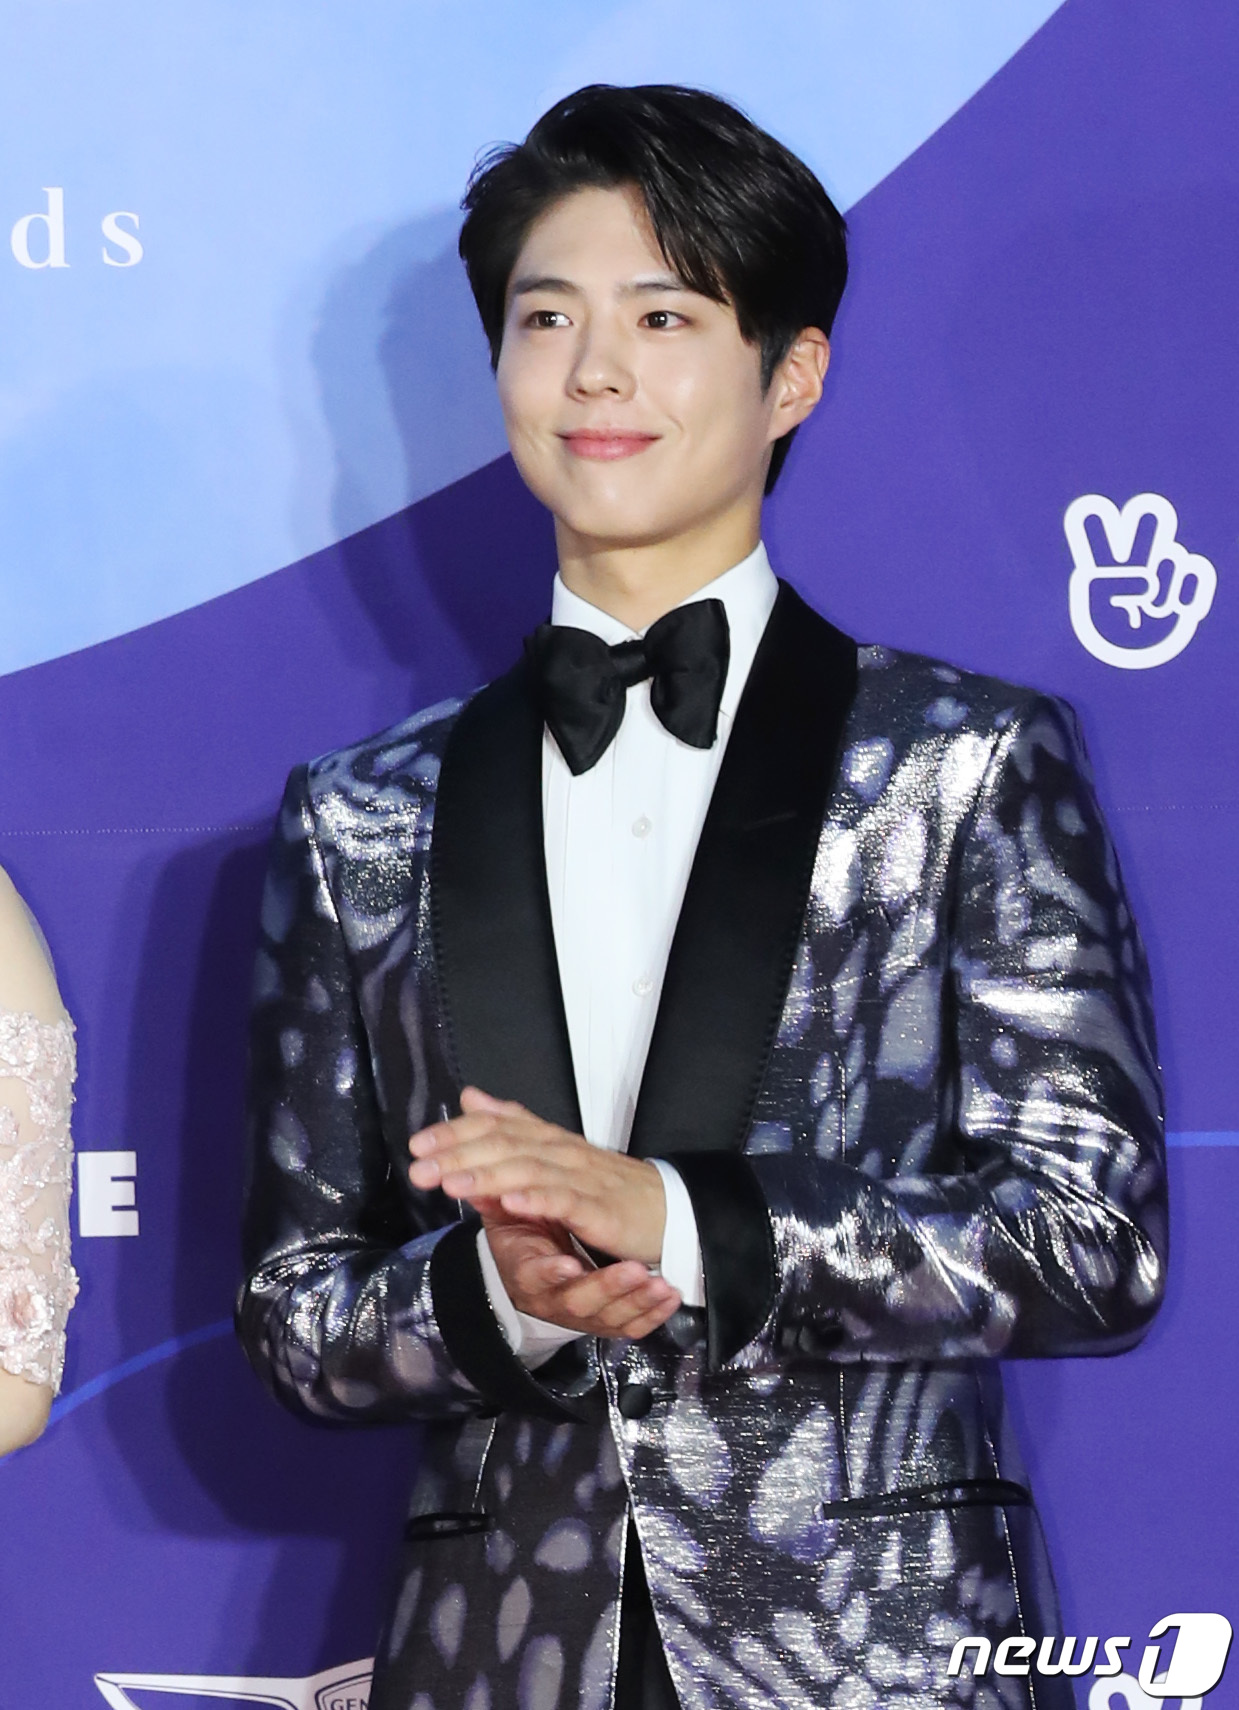 Seoul = = Actor Park Bo-gum is an Navy cultural publicist and will be Enlisted August 31.Park Bo-gum has passed the Navy Culture Promotional Disease, Park Bo-gum agency Blossom Entertainment said in an official statement. We will be Enlisted on August 31.The agency said, We plan to finish filming the movie Wonderland and the drama Youth Record until Enlisted. I would like to ask Park Bo-gum Actor to support the defense obligations in a healthy manner.Park Bo-gum, who majored in musicals at Myongji University, applied for the Navy Military Music and the Culture Promotional Division of the Troops, and conducted practical and interview tests at Navy Headquarters in Gyeryong City, Chungnam Province on the 1st of this month.He was later declared a final pass on the 25th.Park Bo-gum, who passed the Navy Cultural Promotional Hospital, will enter the 669th course of Navy Disease at 2 pm on August 31 and receive basic training for six weeks.Currently, Navy basic training is 5 weeks including the enlistment, but the training period will increase to 6 weeks from the enlistment on August 31.On the other hand, Park Bo-gum is about to broadcast TVN drama Youth Record this year.Youth Record is a drama depicting the contents of giving fulfillment and hope through the influence of the spoon that the parents pass on in the process of becoming an actor and star in the background of Hannam-dong. Park Bo-gum is in close contact with Park So-dam.